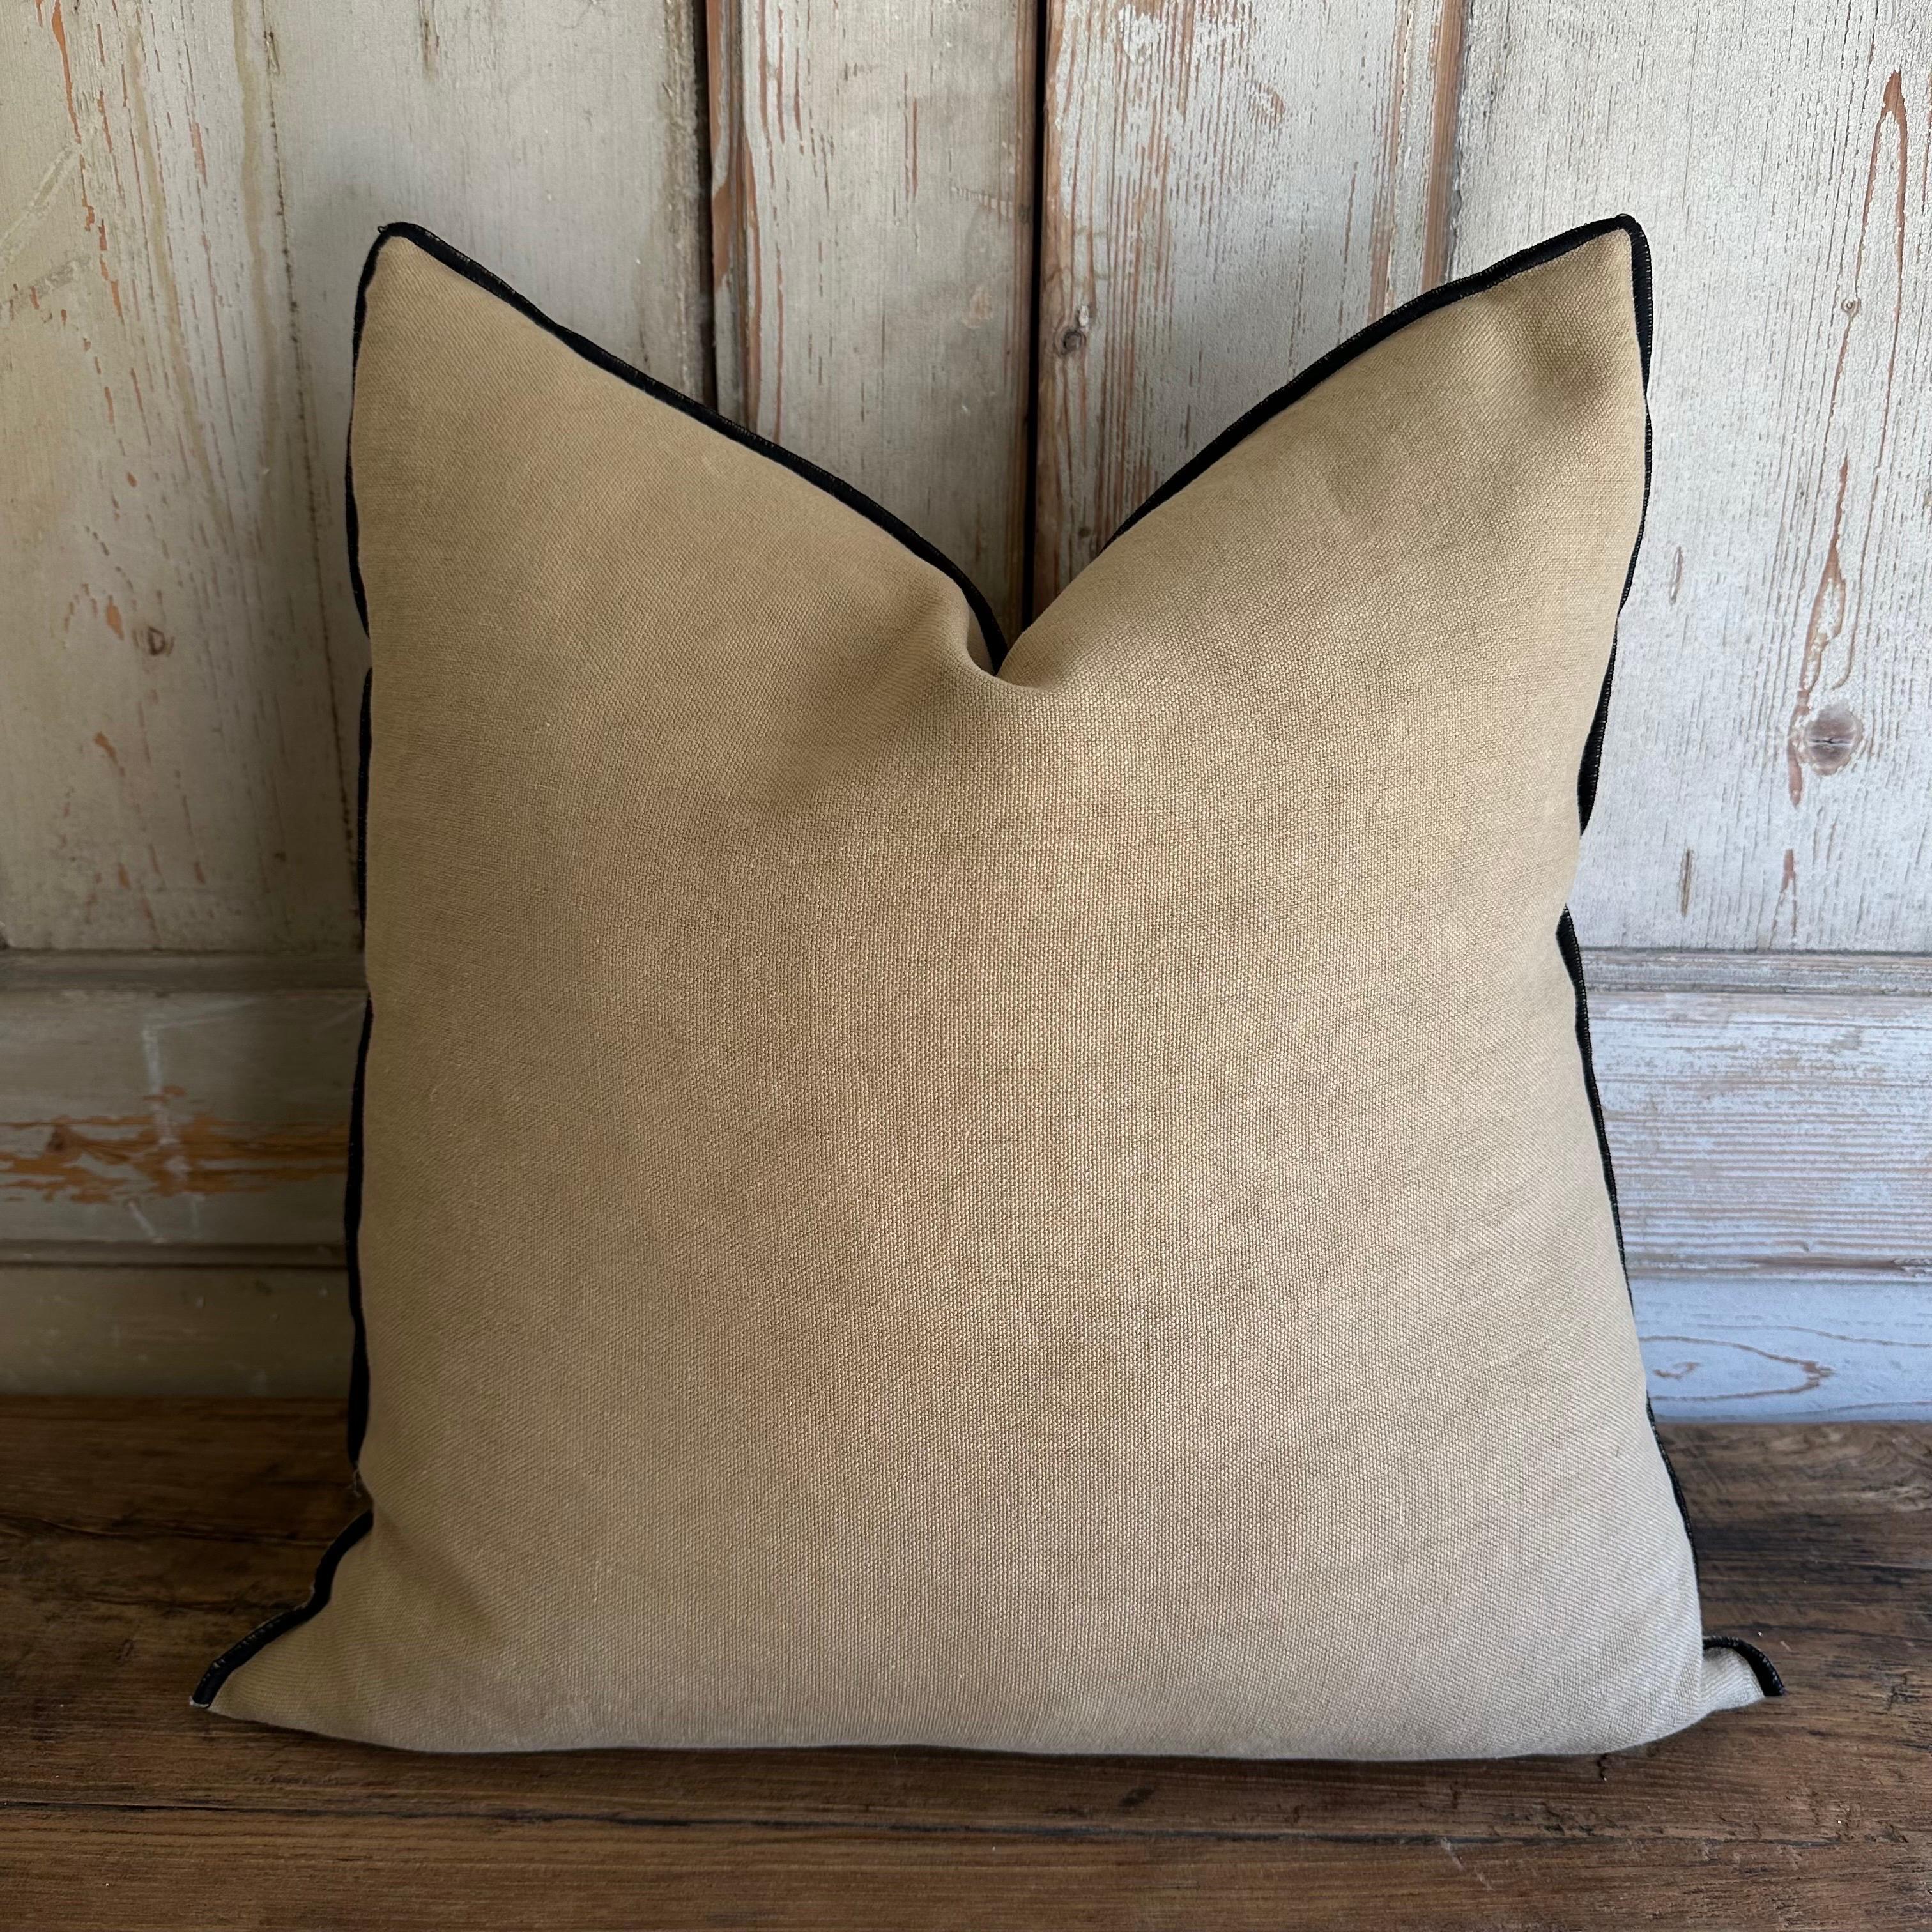 Color : Sable tan/ brown colored nubby textured style pillow with a stitched edge, metal zipper closure. 
Size: 22